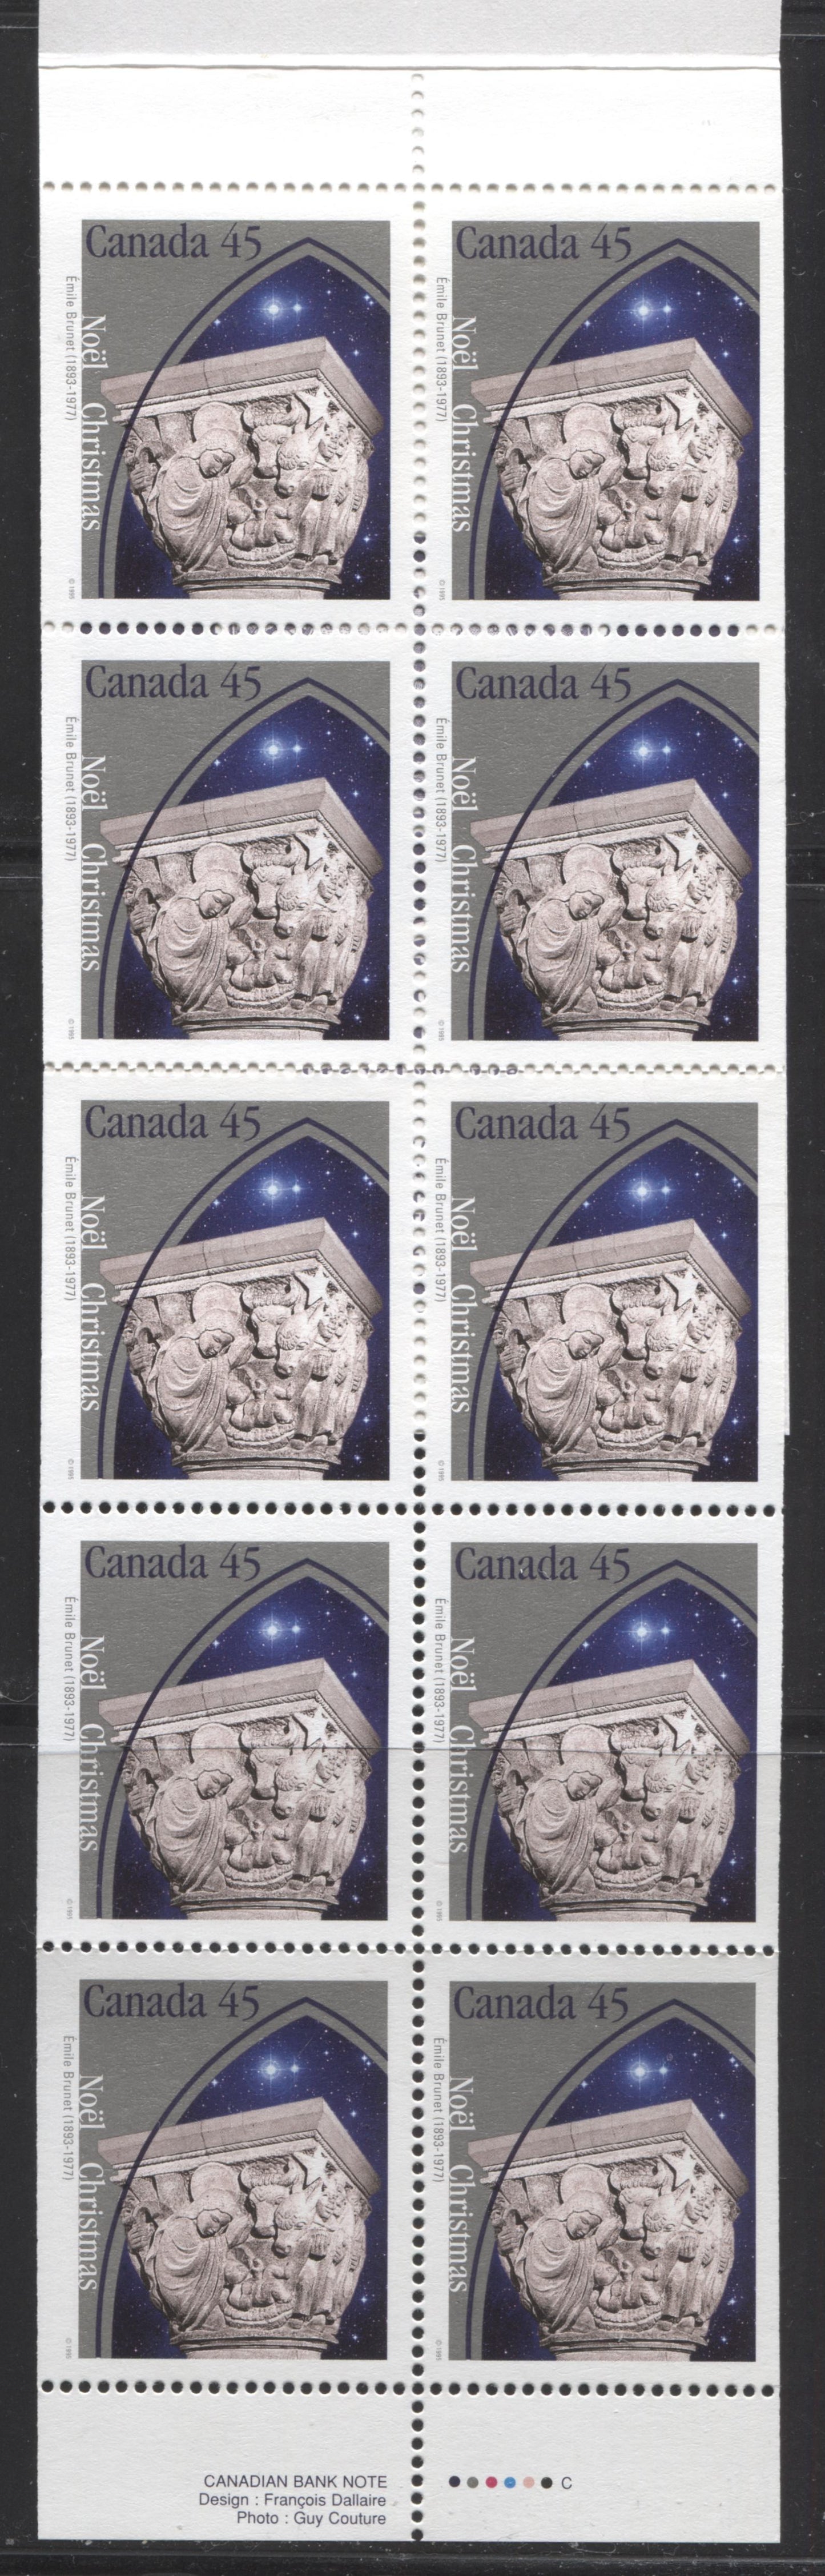 Canada #BK187a-b 1995 Christmas Issue, Complete $4.50 Booklet, Coated Papers Paper, Dead Paper, 4 mm GT-4 Tagging Brixton Chrome 